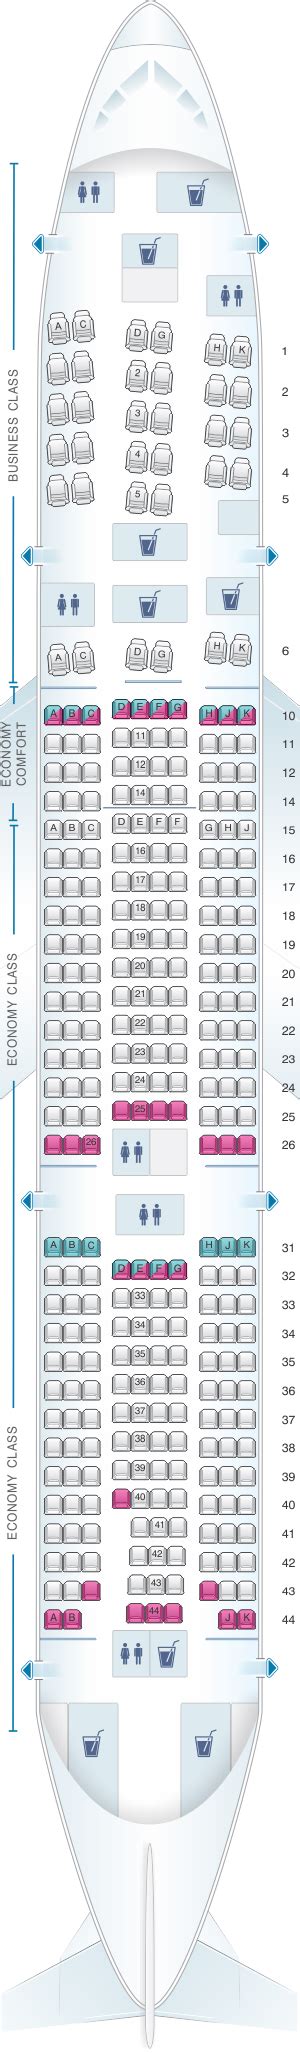 Seat Map Klm Boeing B777 200er New World Business Class Seatmaestro